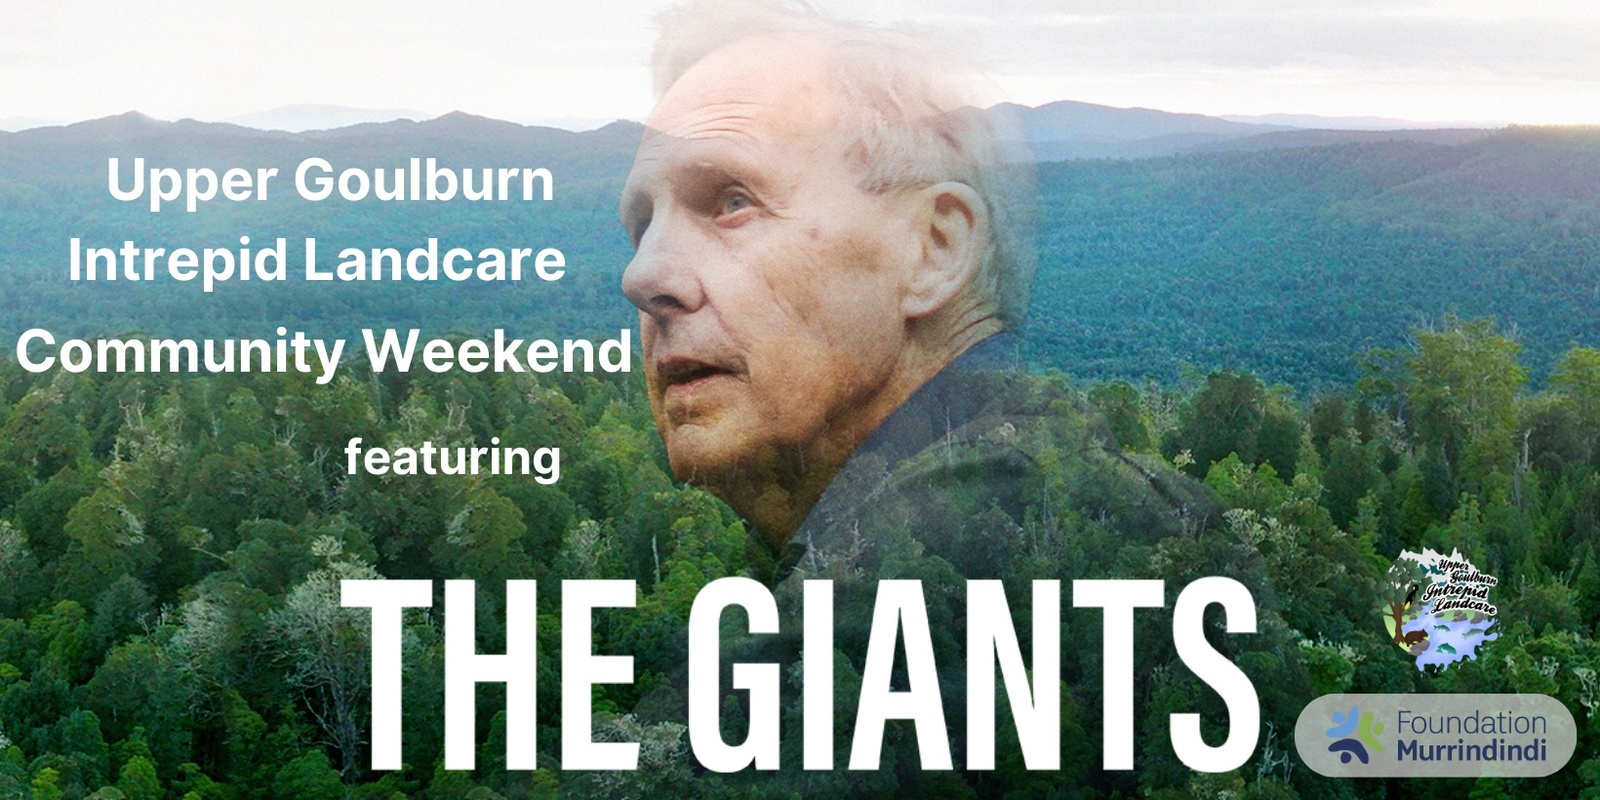 Banner image for Upper Goulburn Intrepid Landcare Community Weekend featuring THE GIANTS